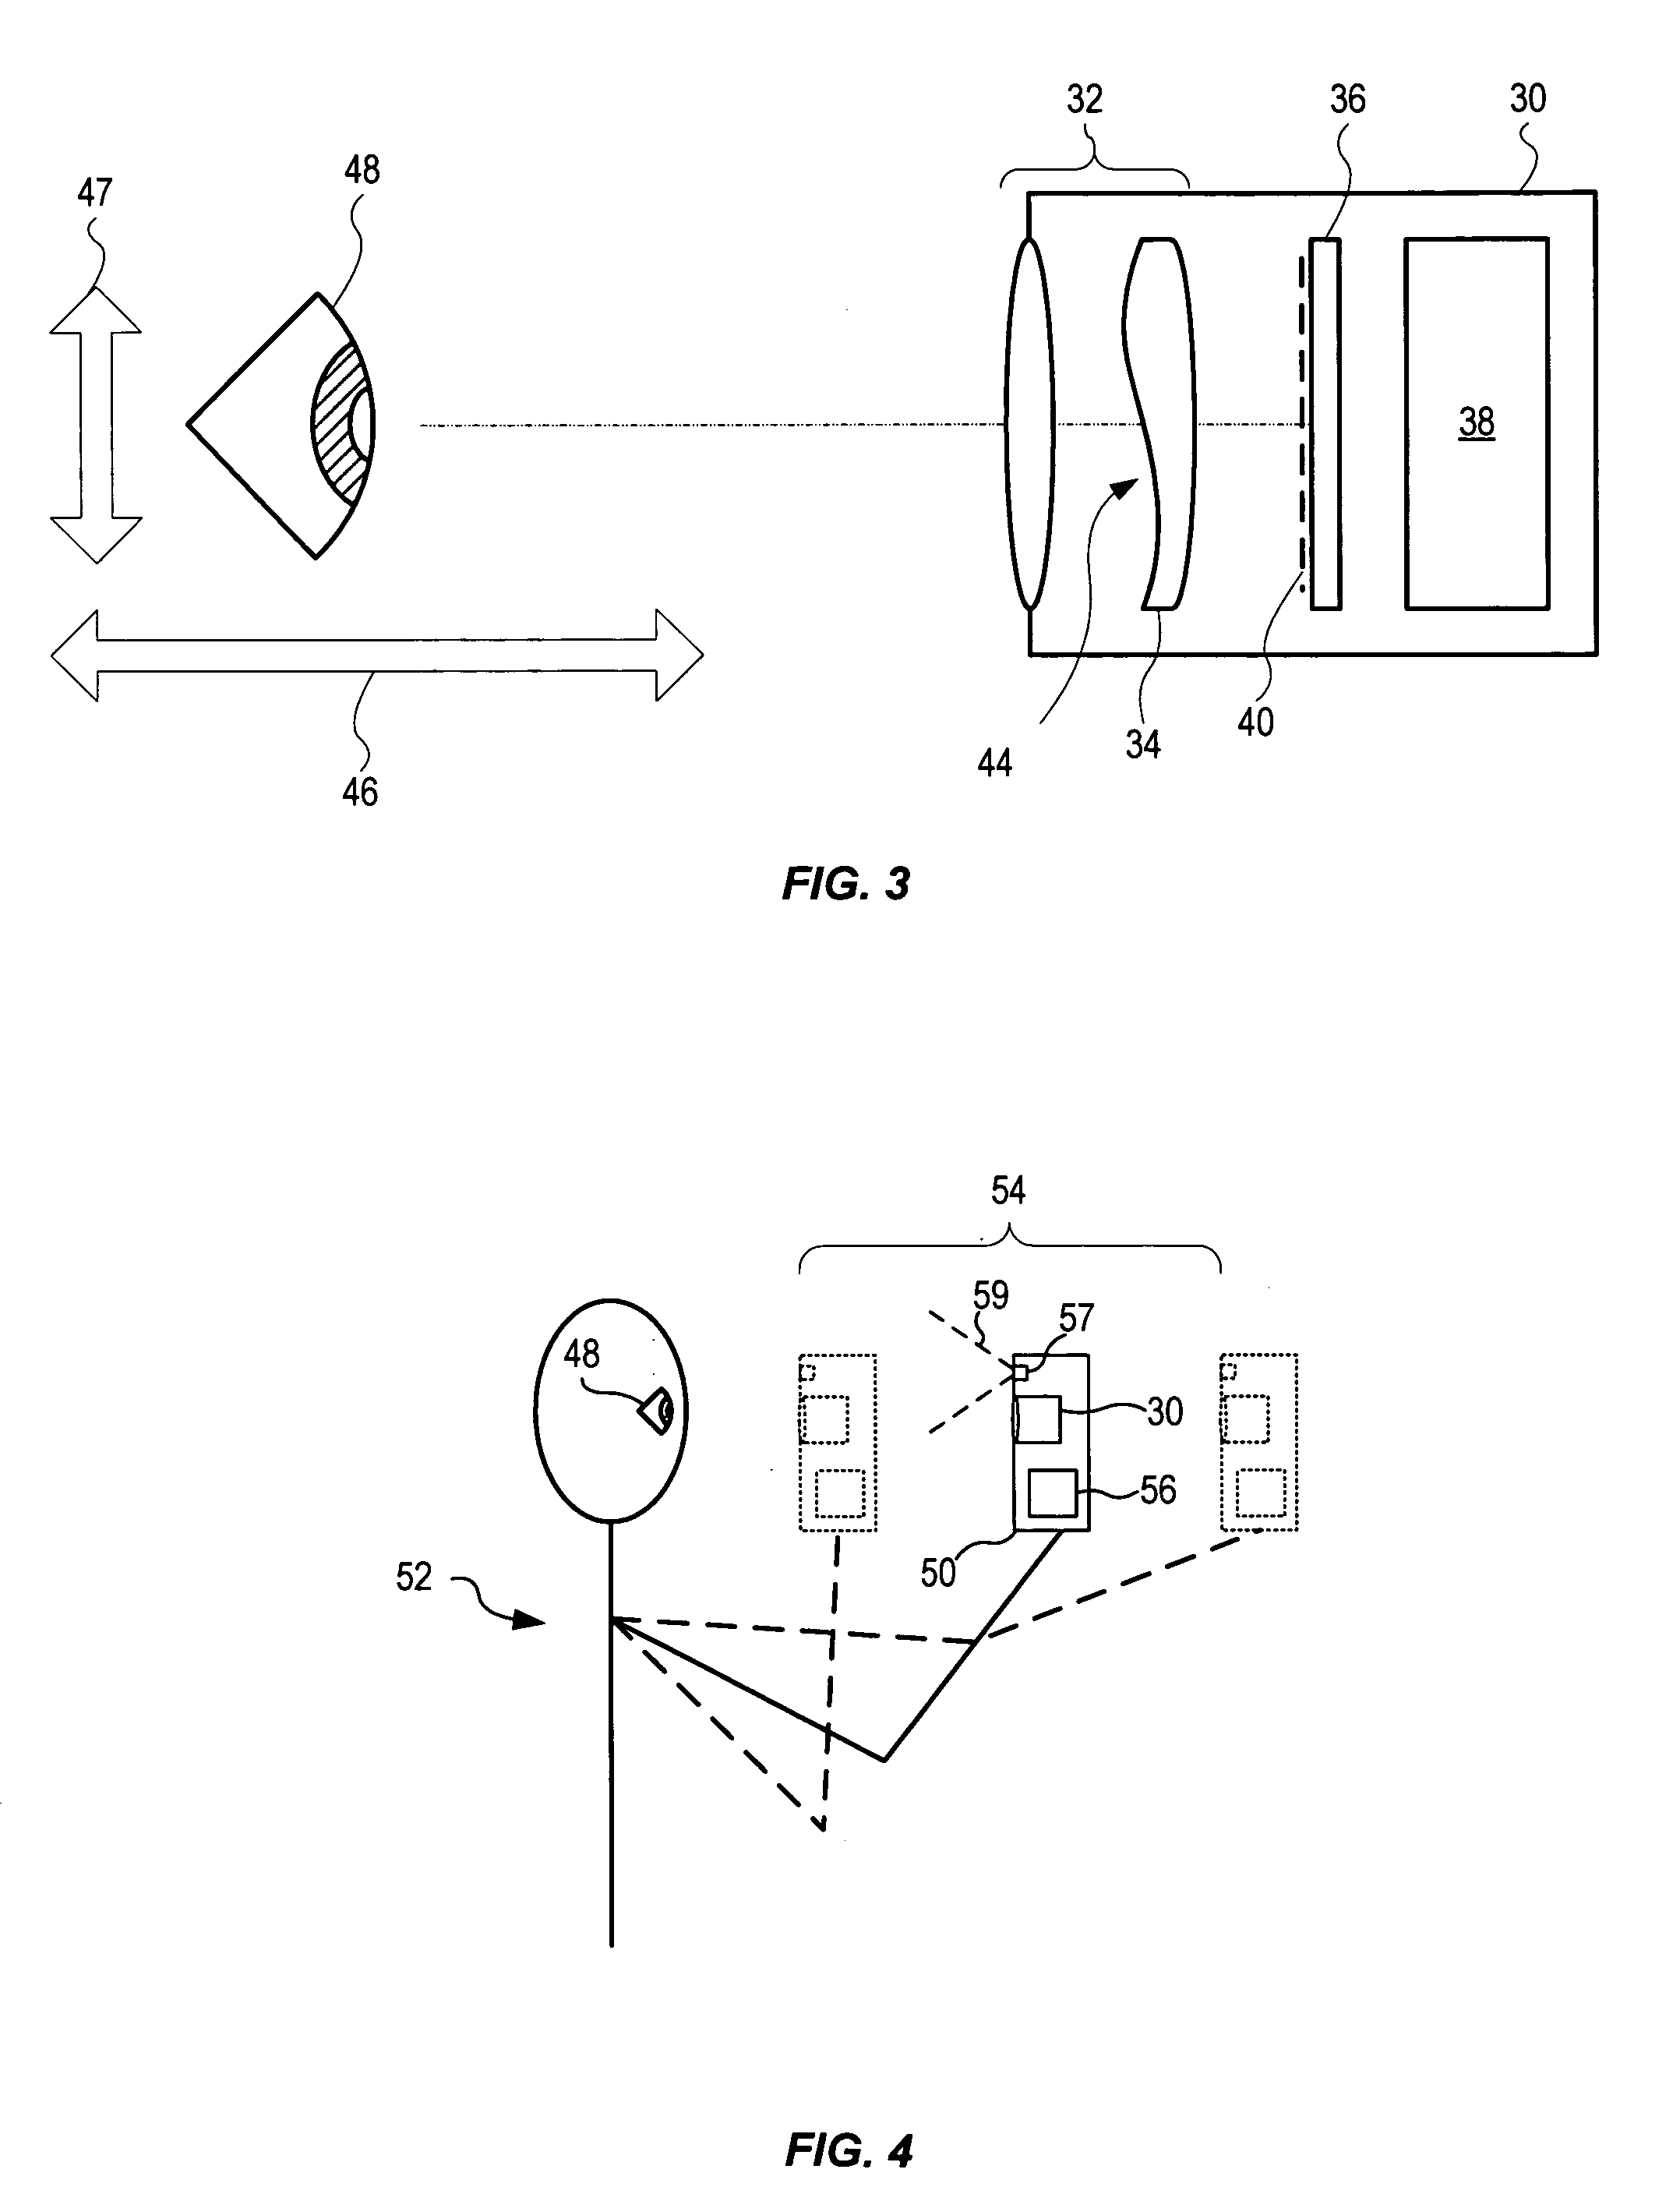 Iris image capture devices and associated systems